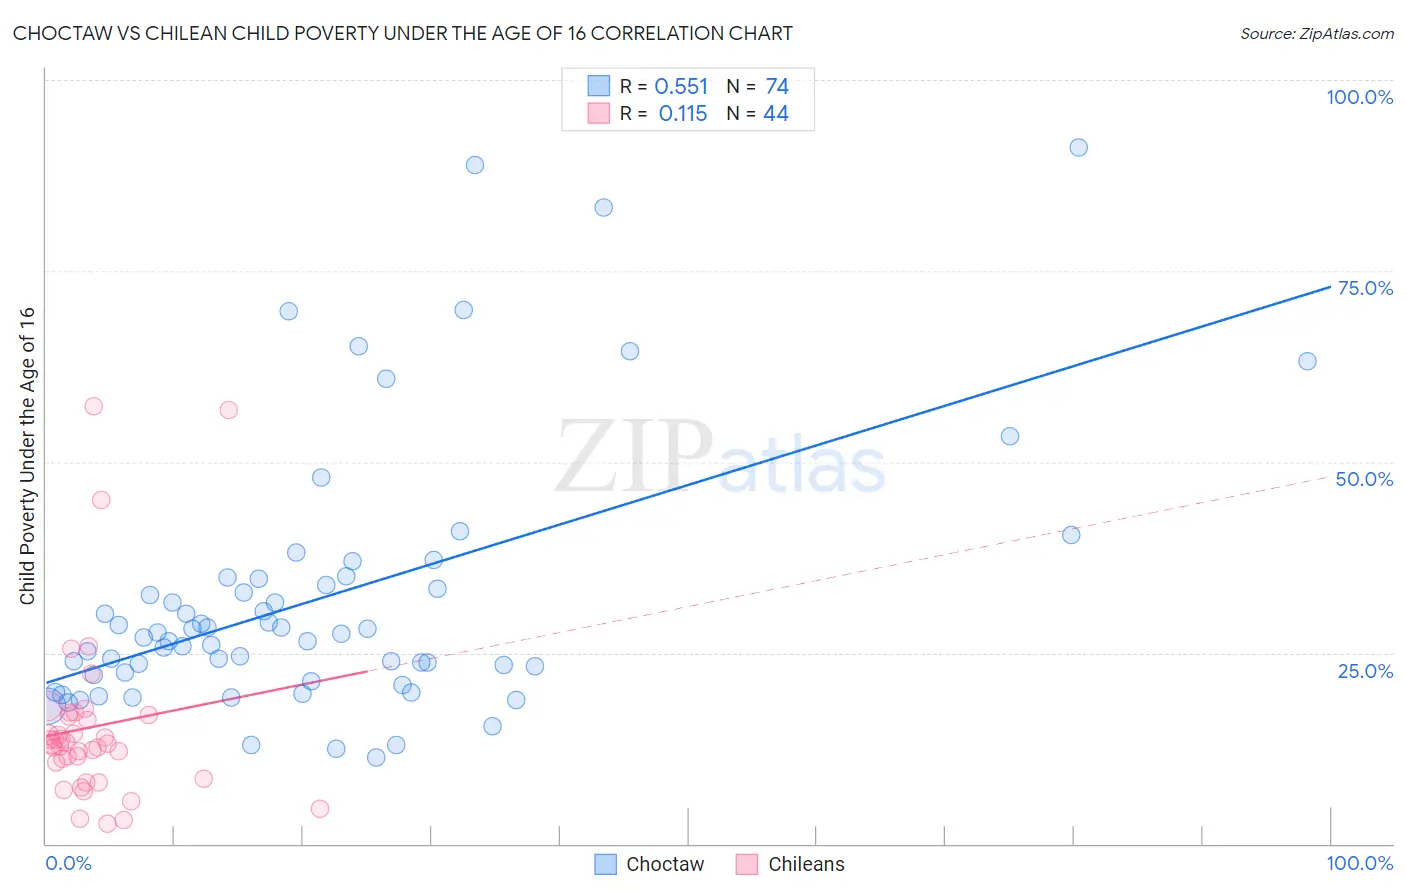 Choctaw vs Chilean Child Poverty Under the Age of 16